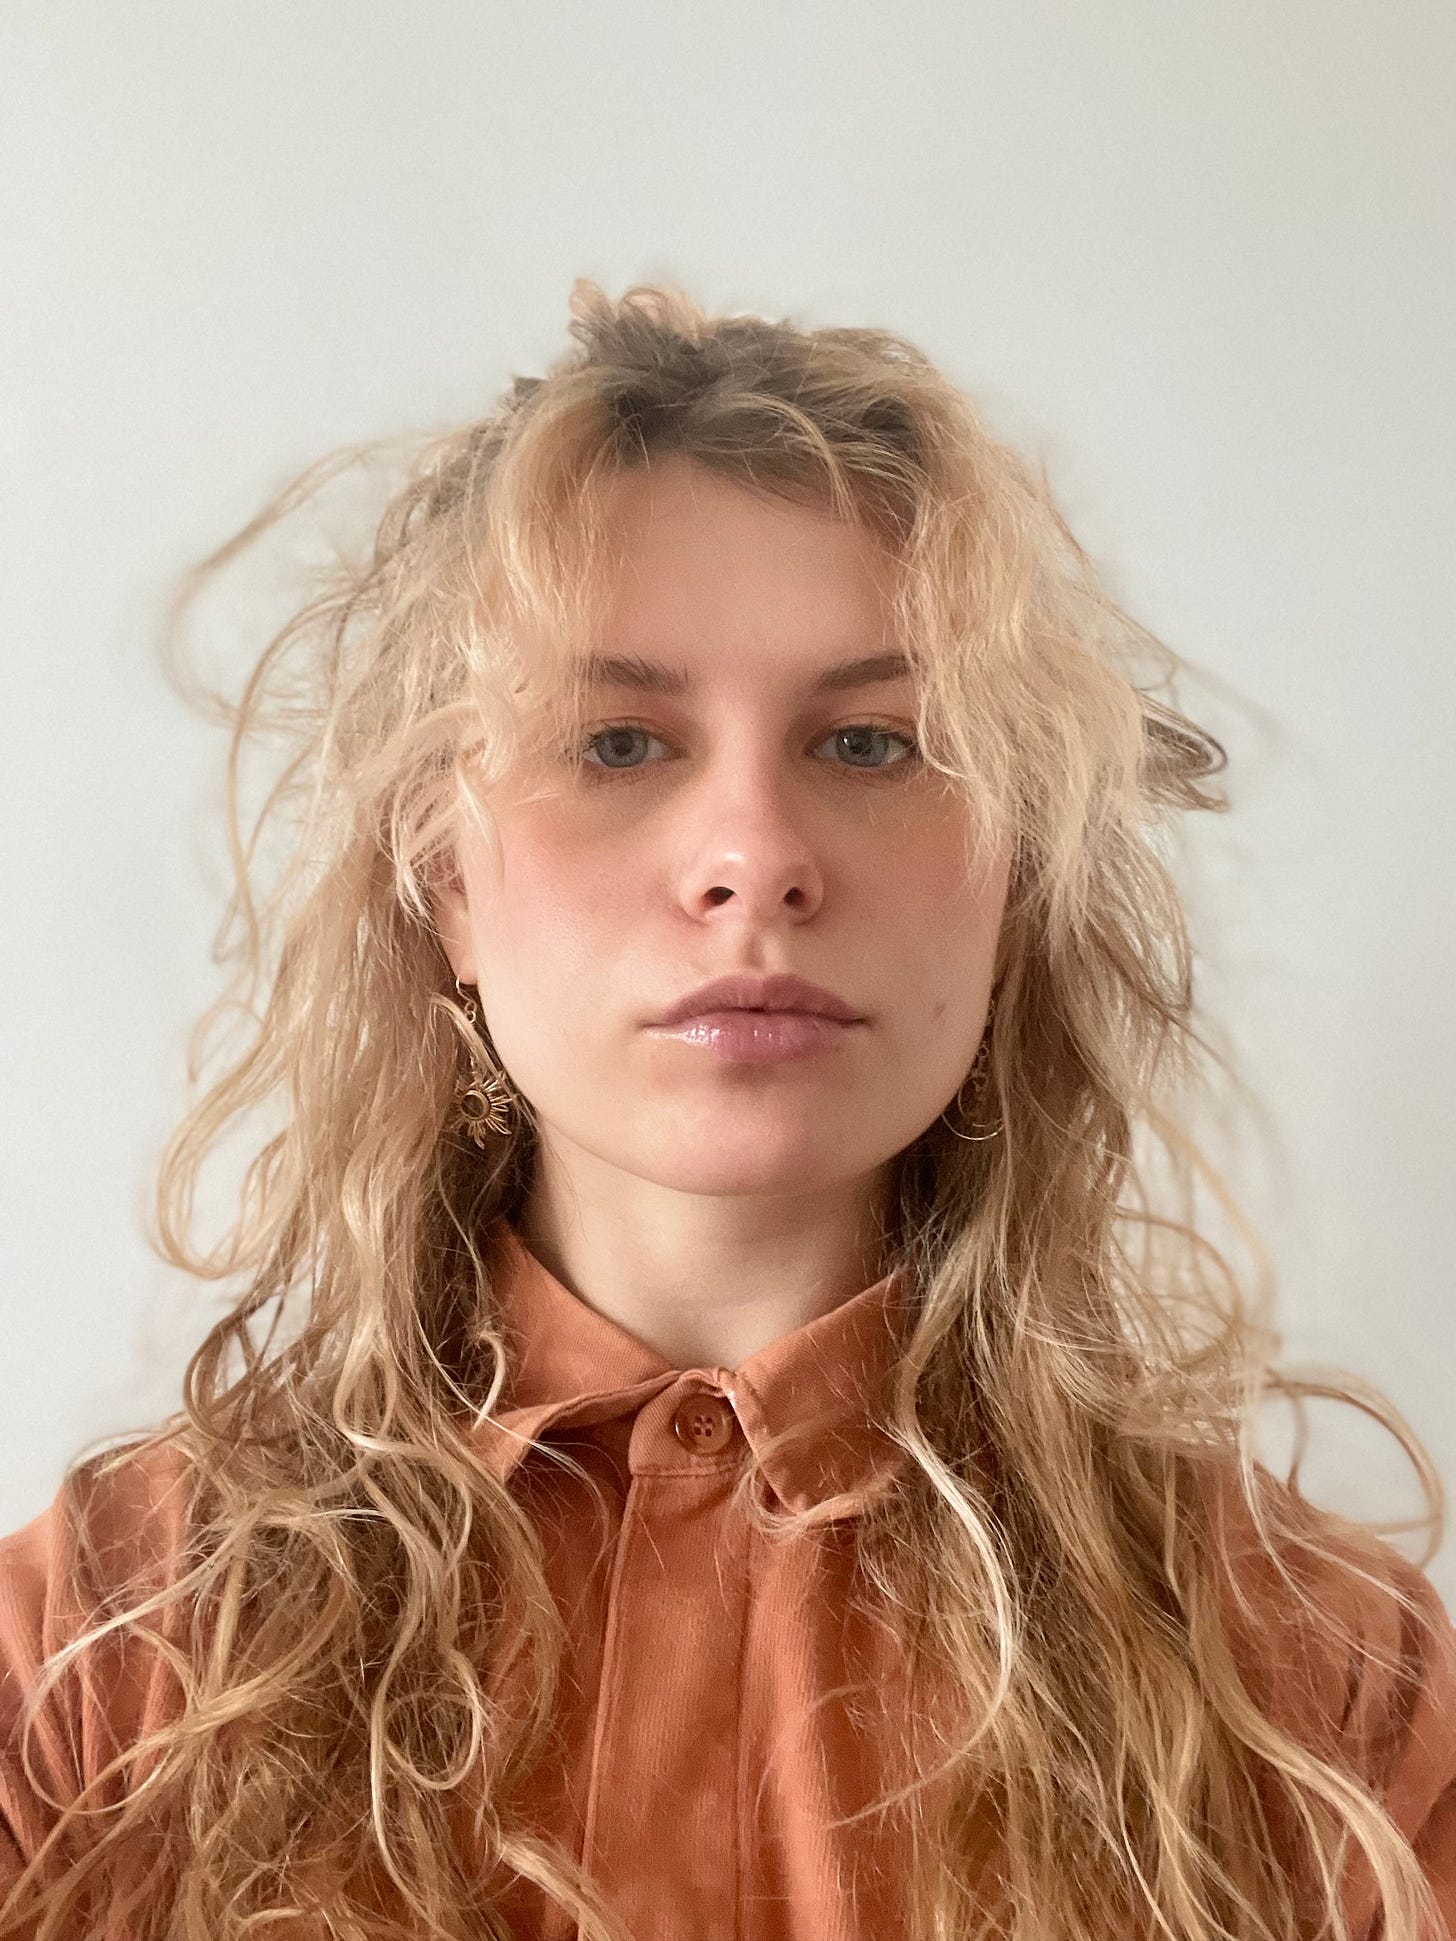 an ID style photo of a white woman with wavy hair, pale orange jumper and gold sun/moon earrings she got from her partner for Christmas, a solemn grumps look